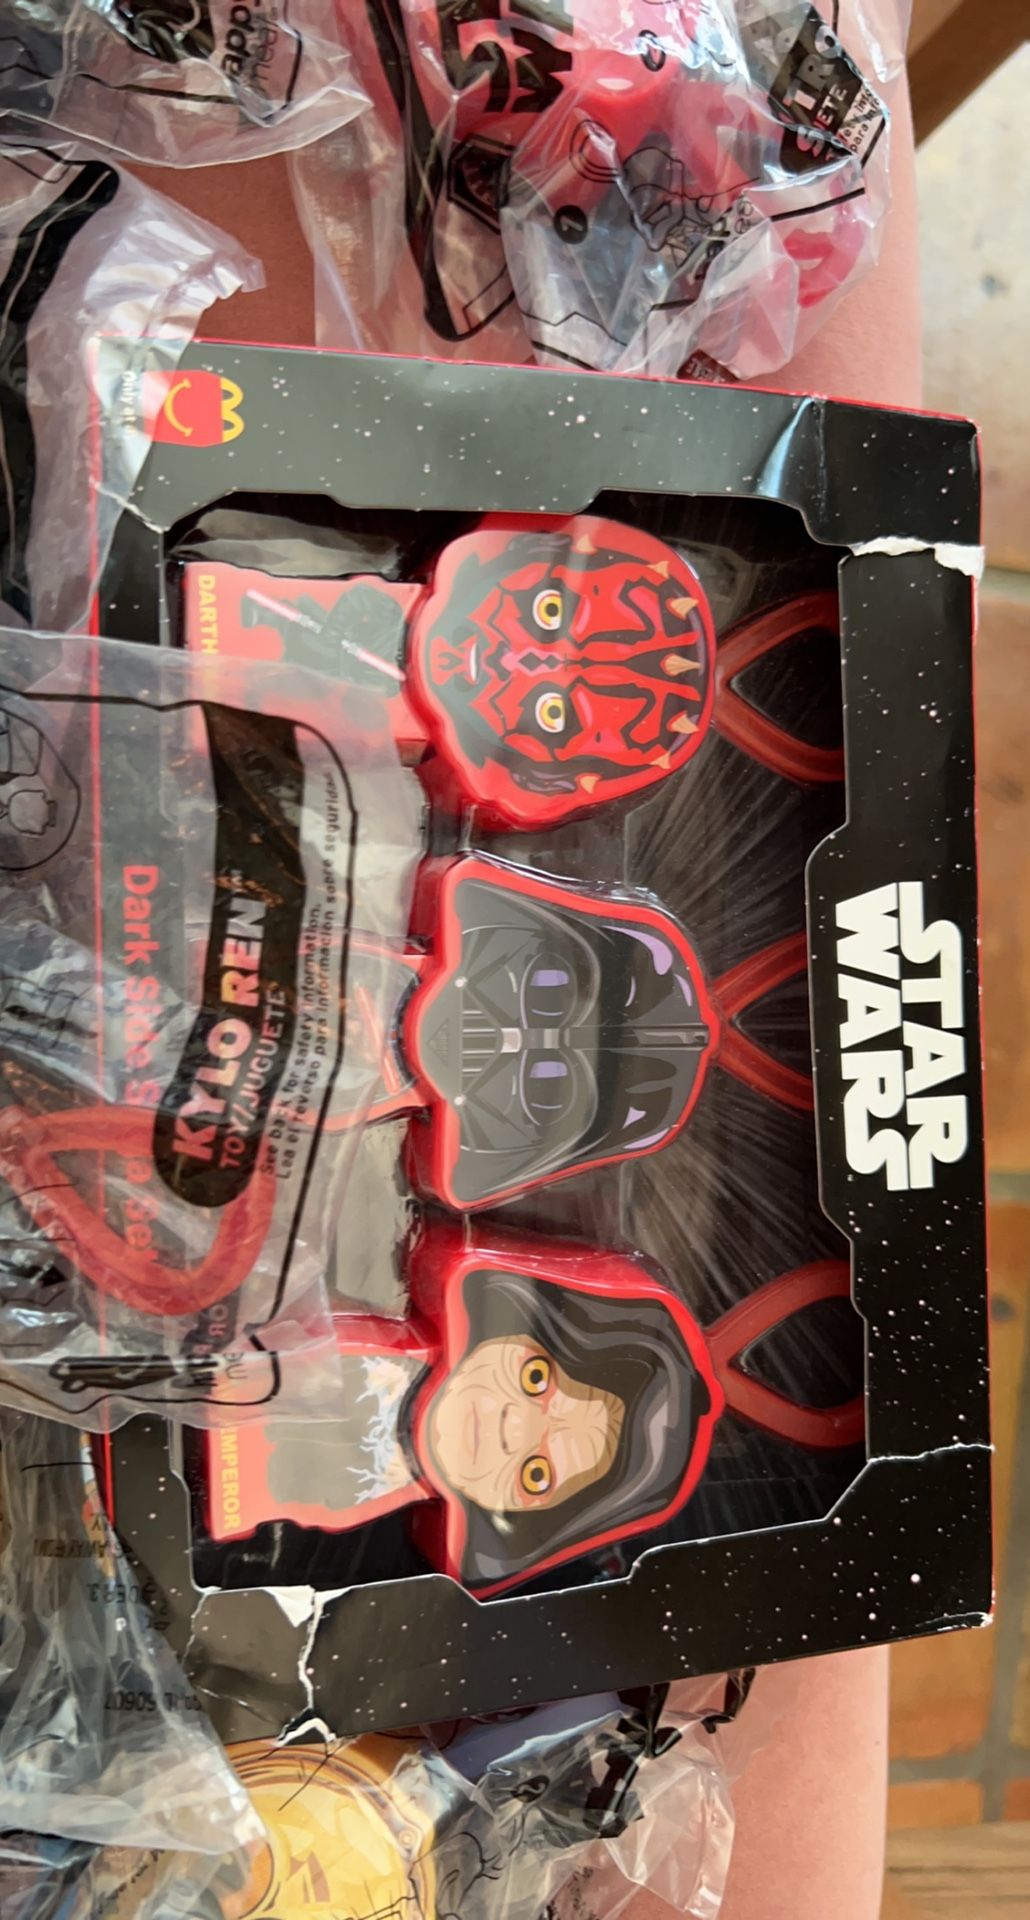 Star Wars McDonalds Happy meal Toys *Collectors*